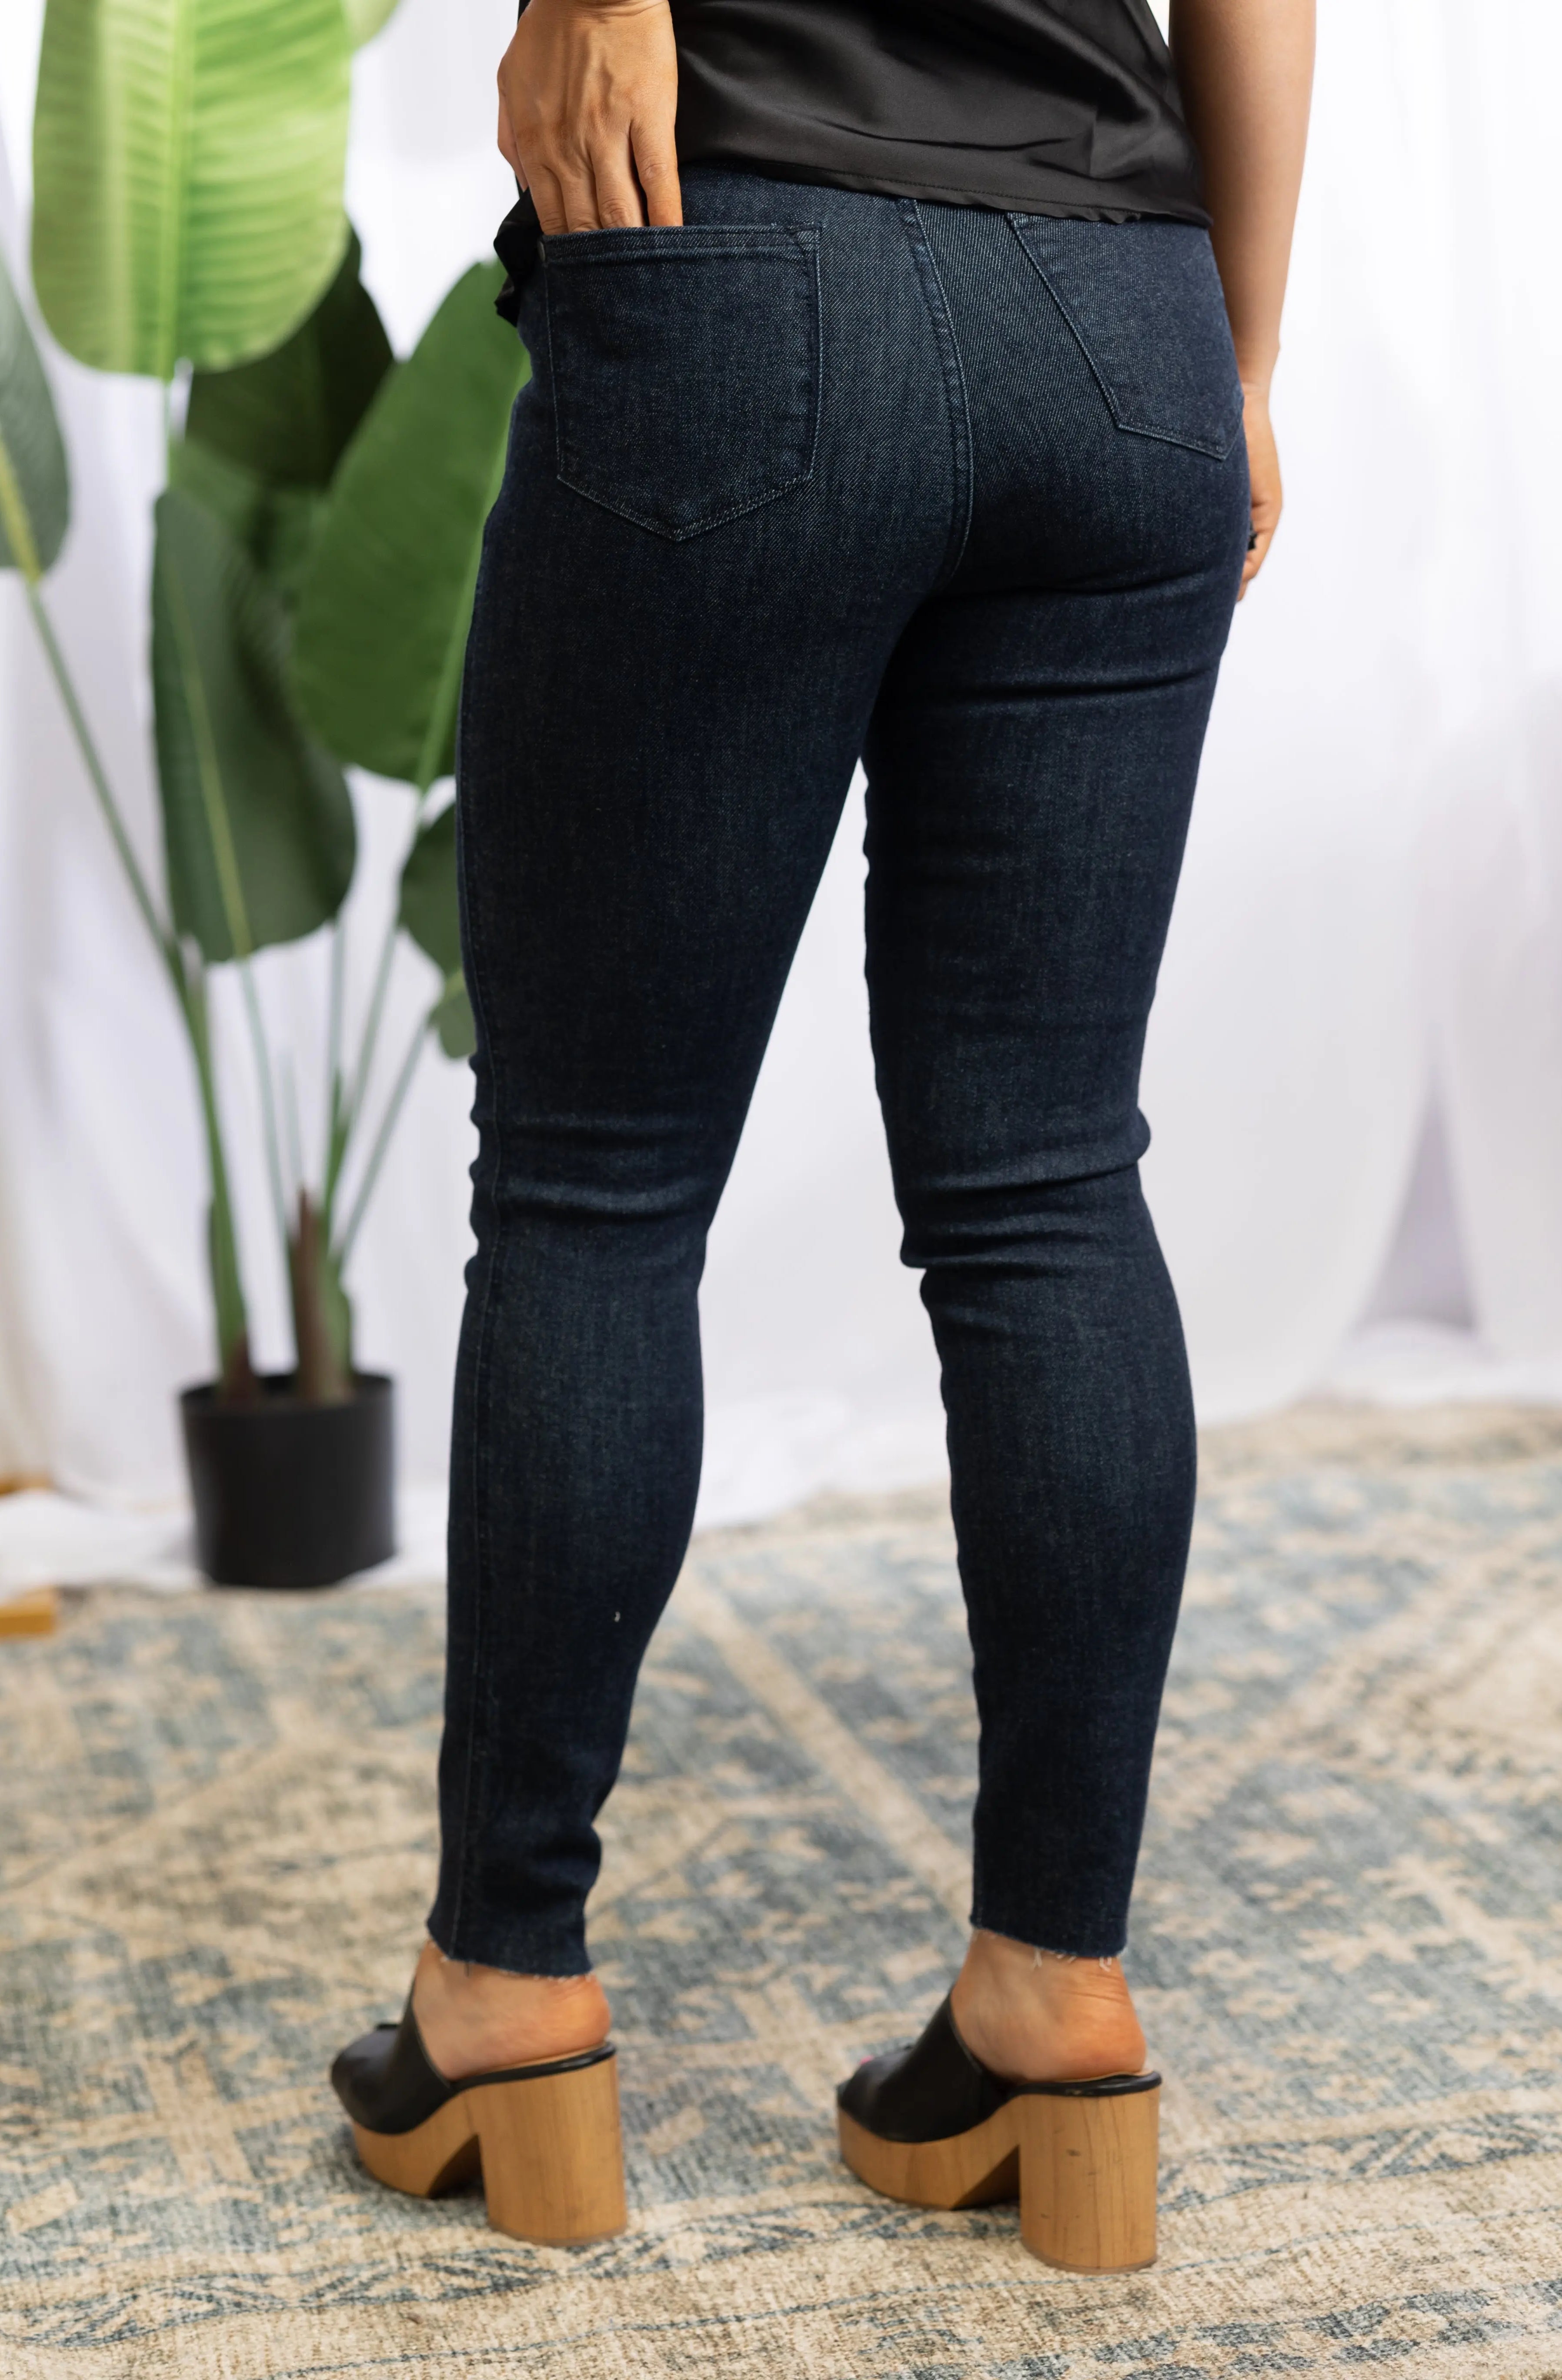 In Full (Tummy) Control - Judy Blue Skinnies JB Boutique Simplified